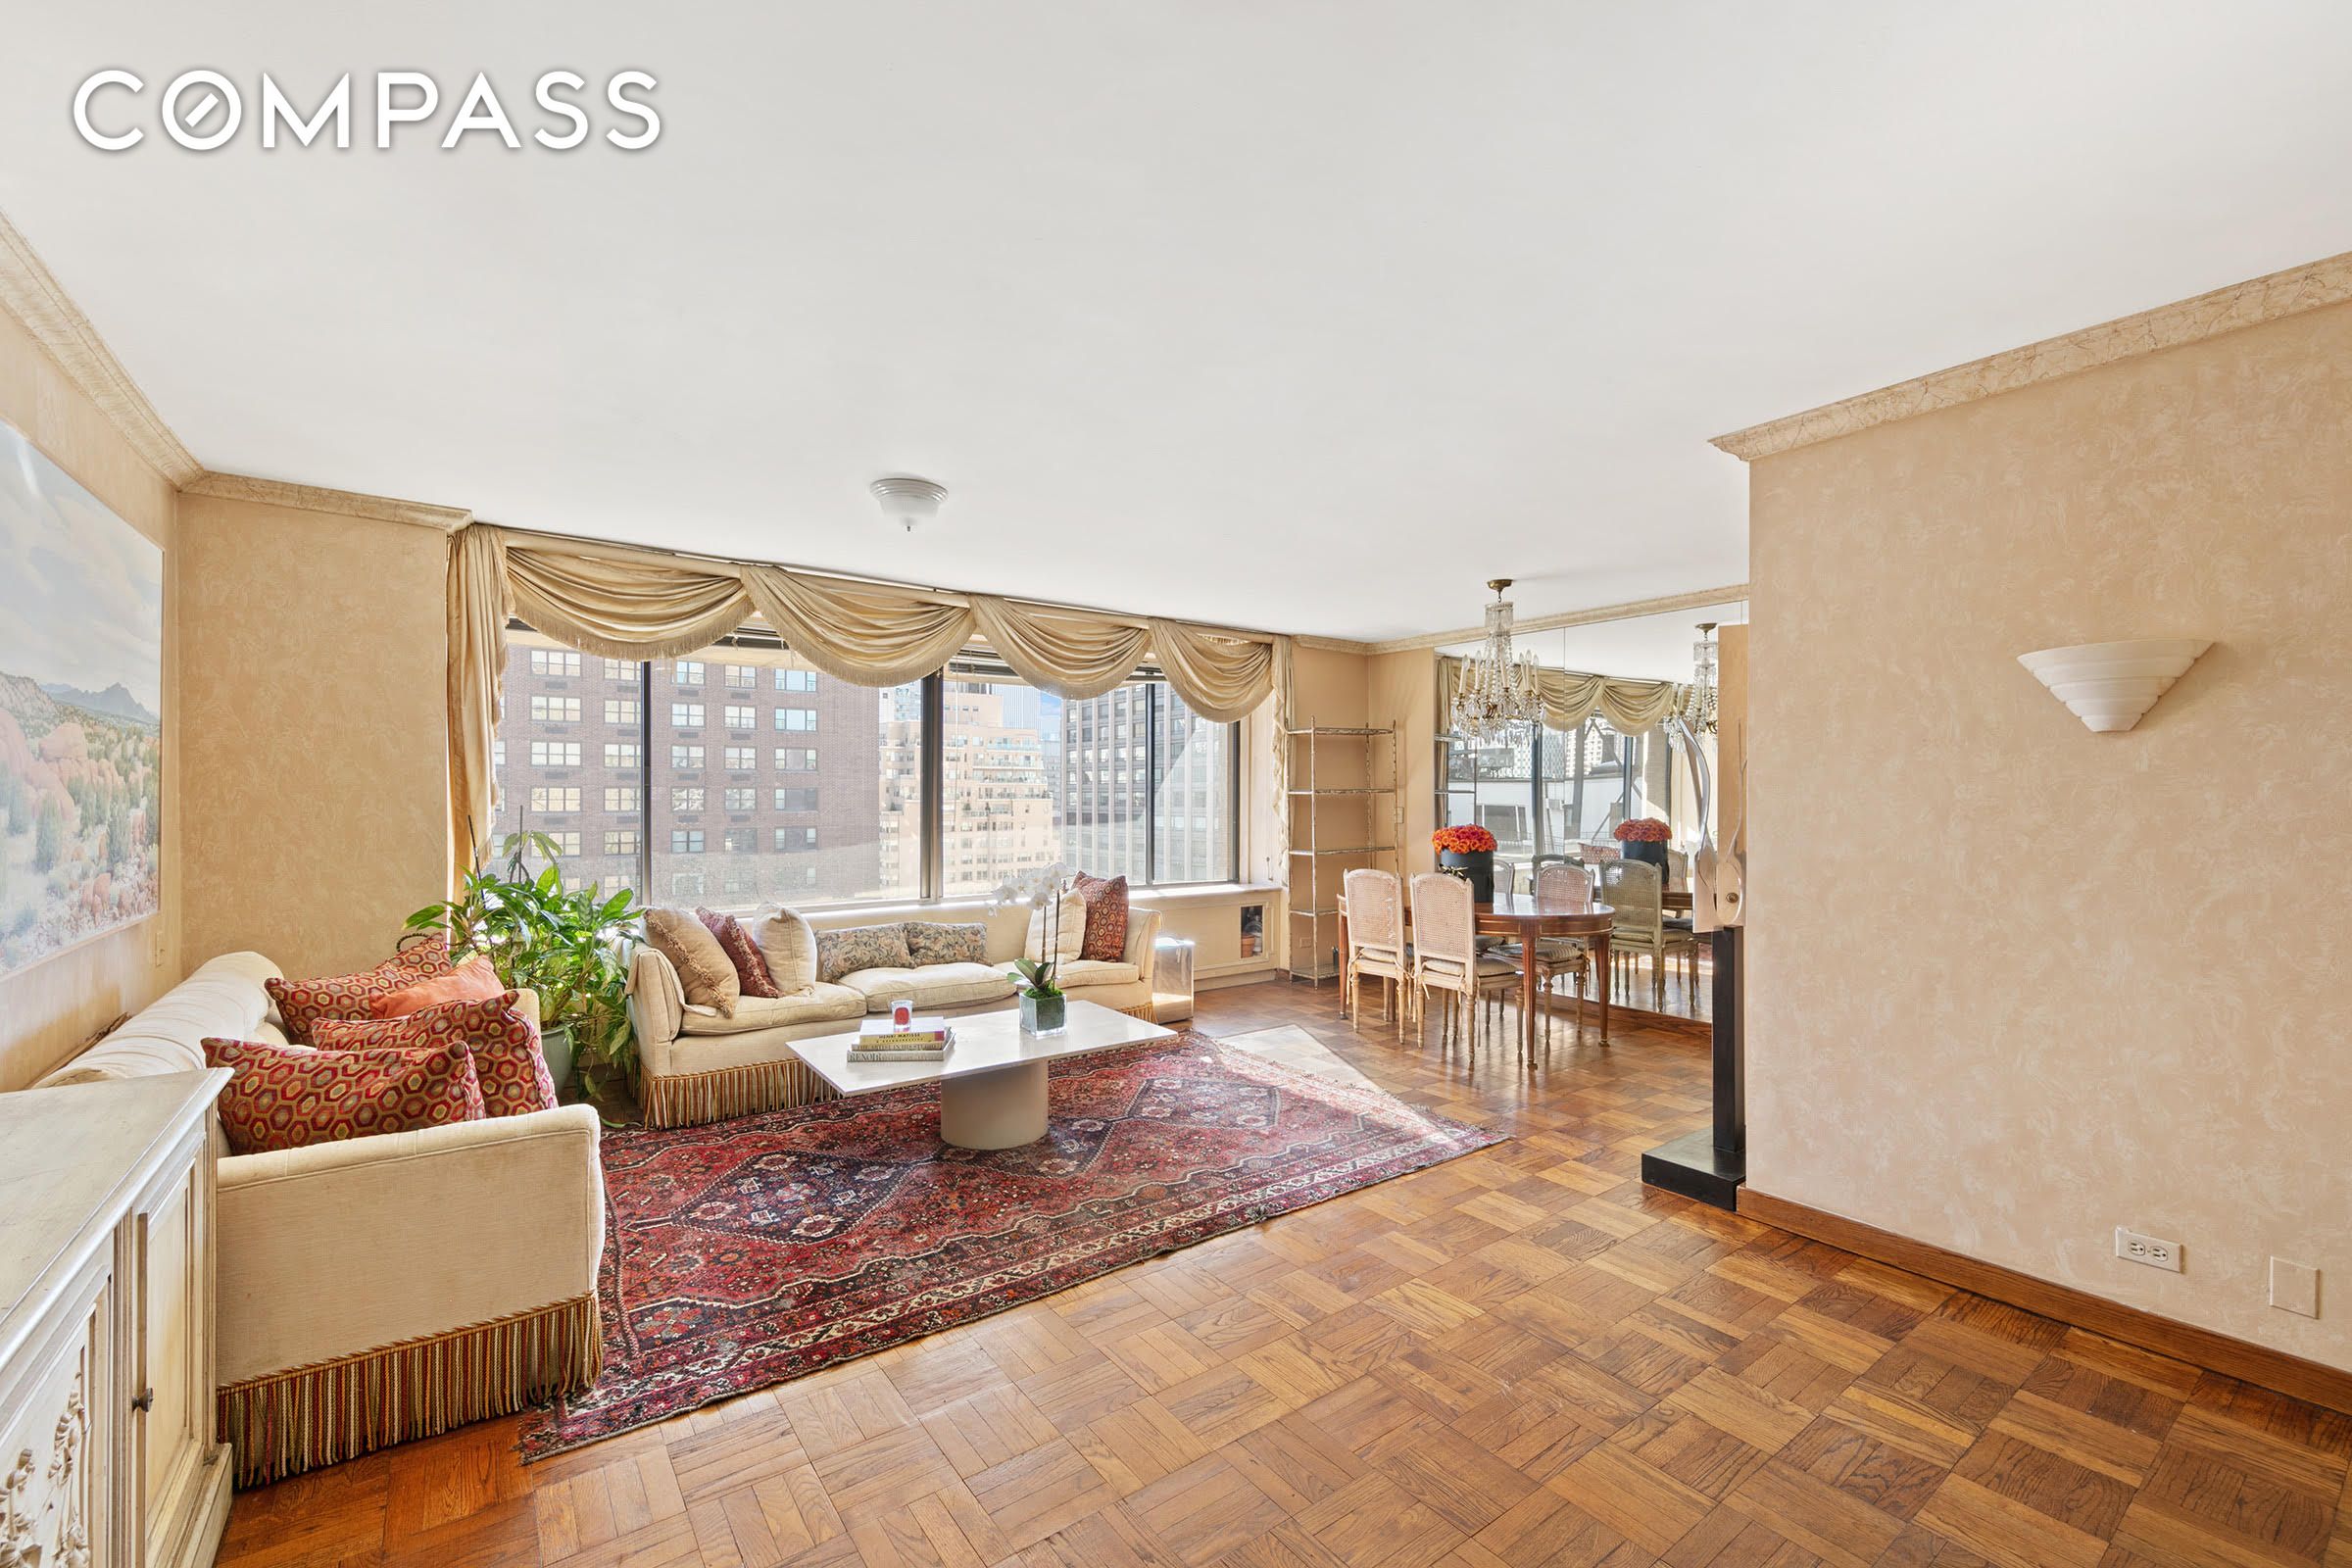 203 East 72nd Street, New York City NY 10021 A.N Shell Realty